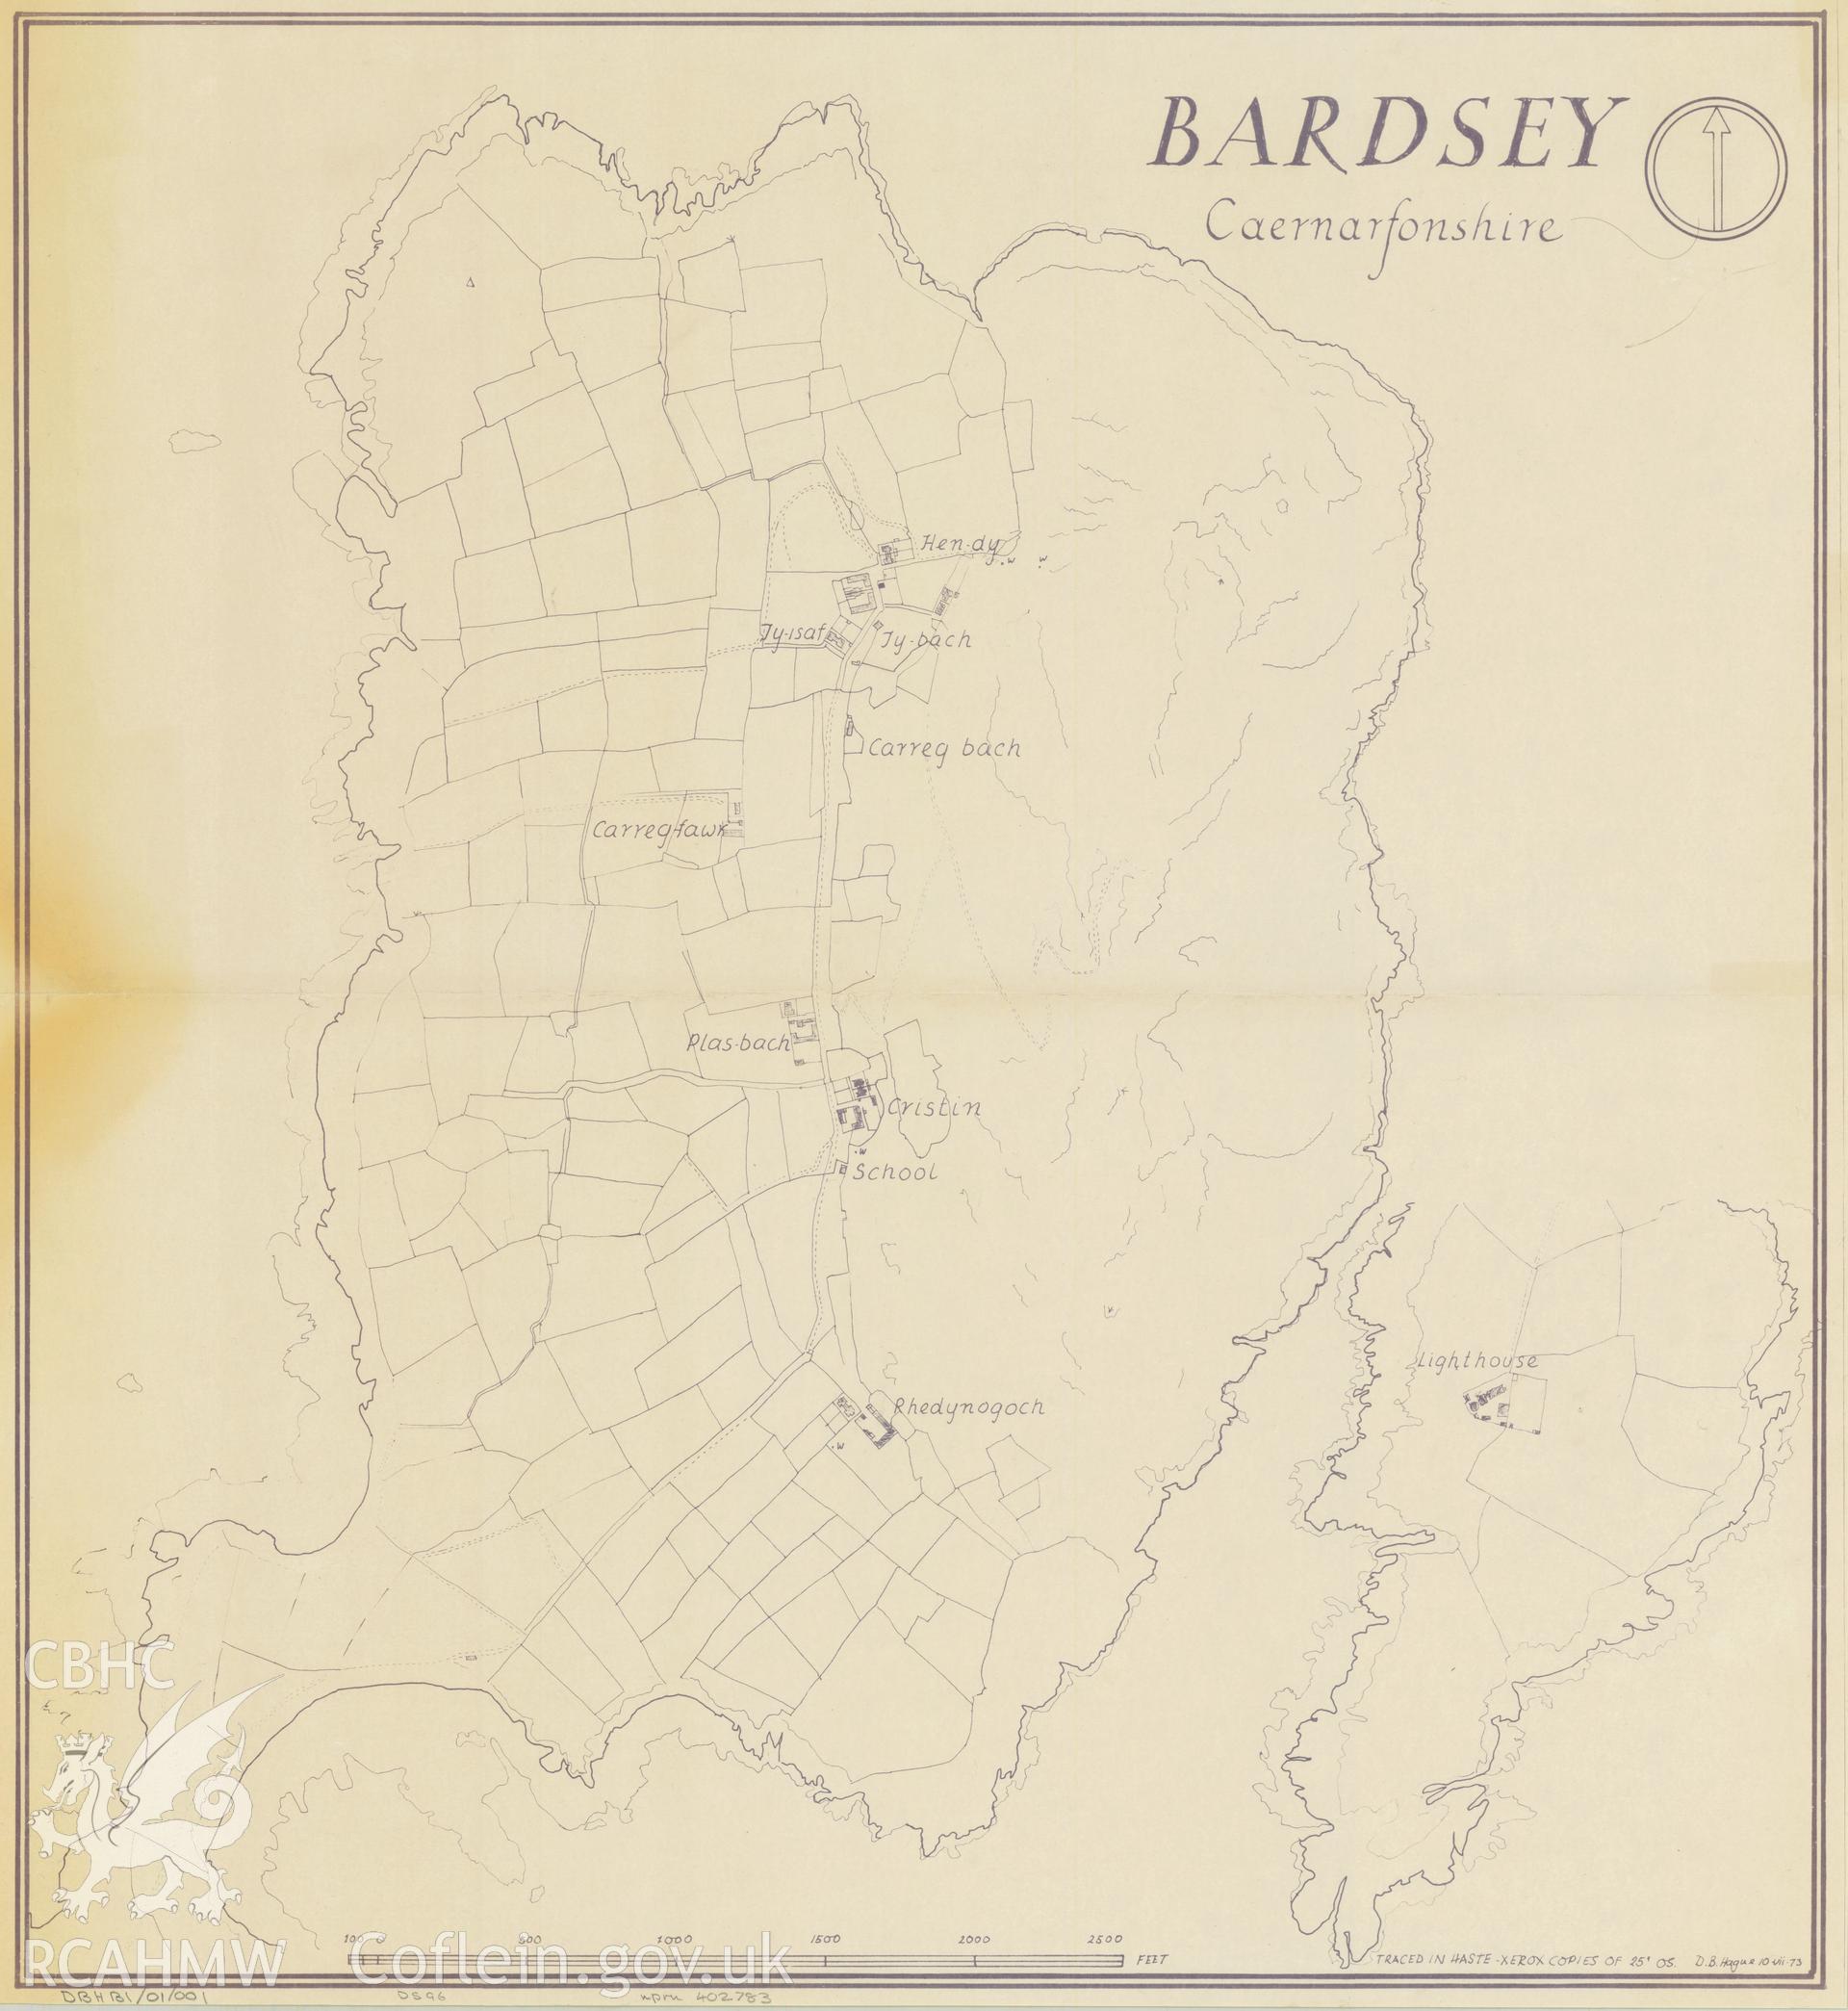 Dyeline copy of an annotated large scale map showing the location of farmsteads across Bardsey Island, compiled by Douglas Hague 1973